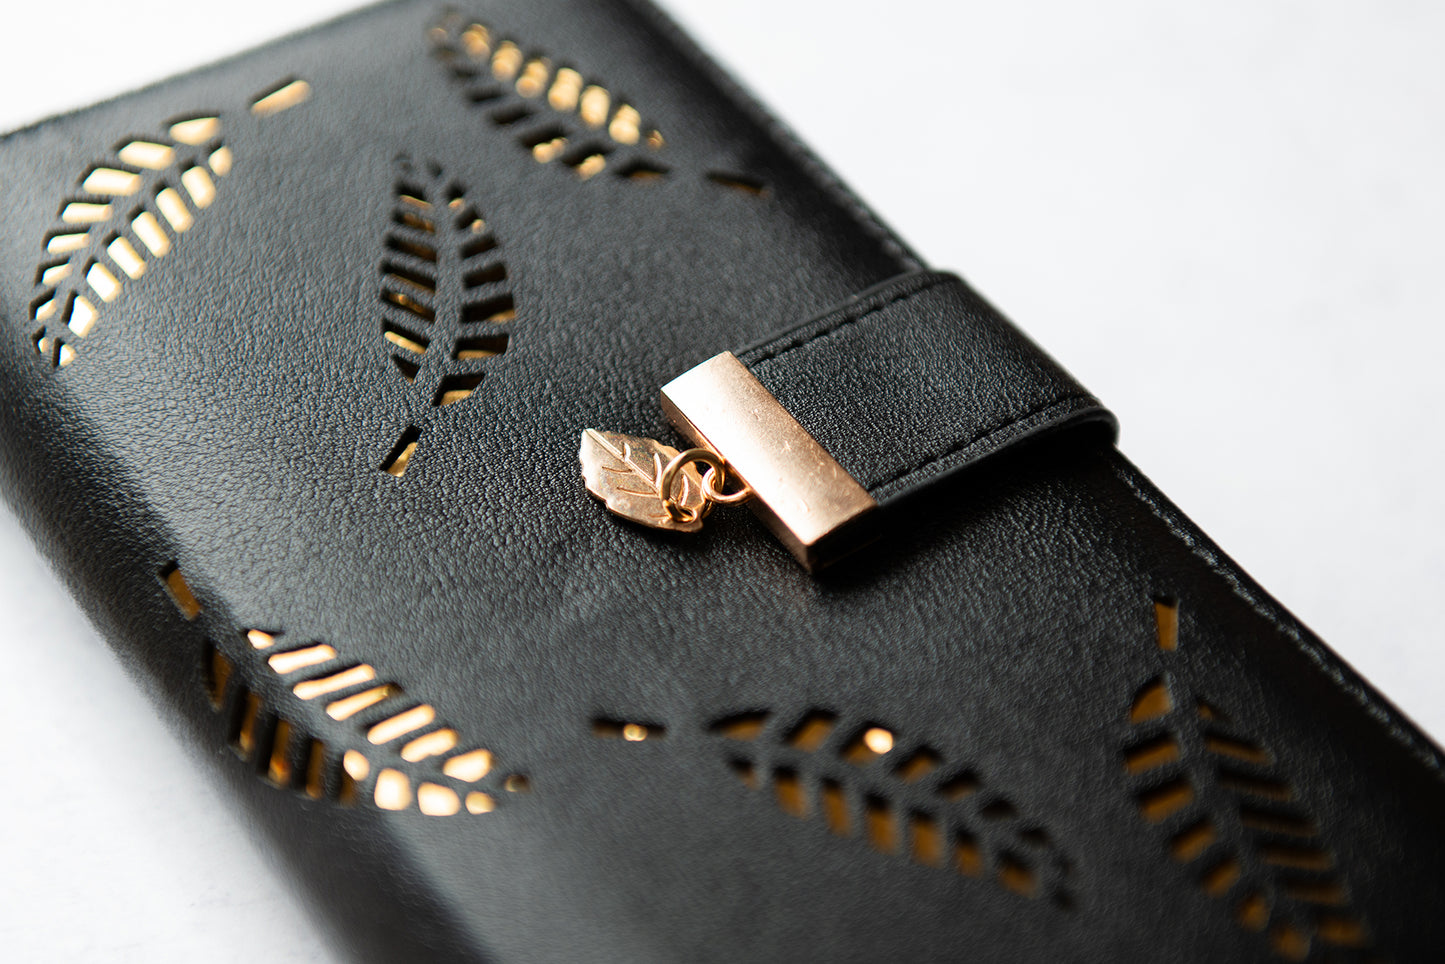 Vegan Leather Leaf Wallet - 3 Colors & 2 Sizes Available